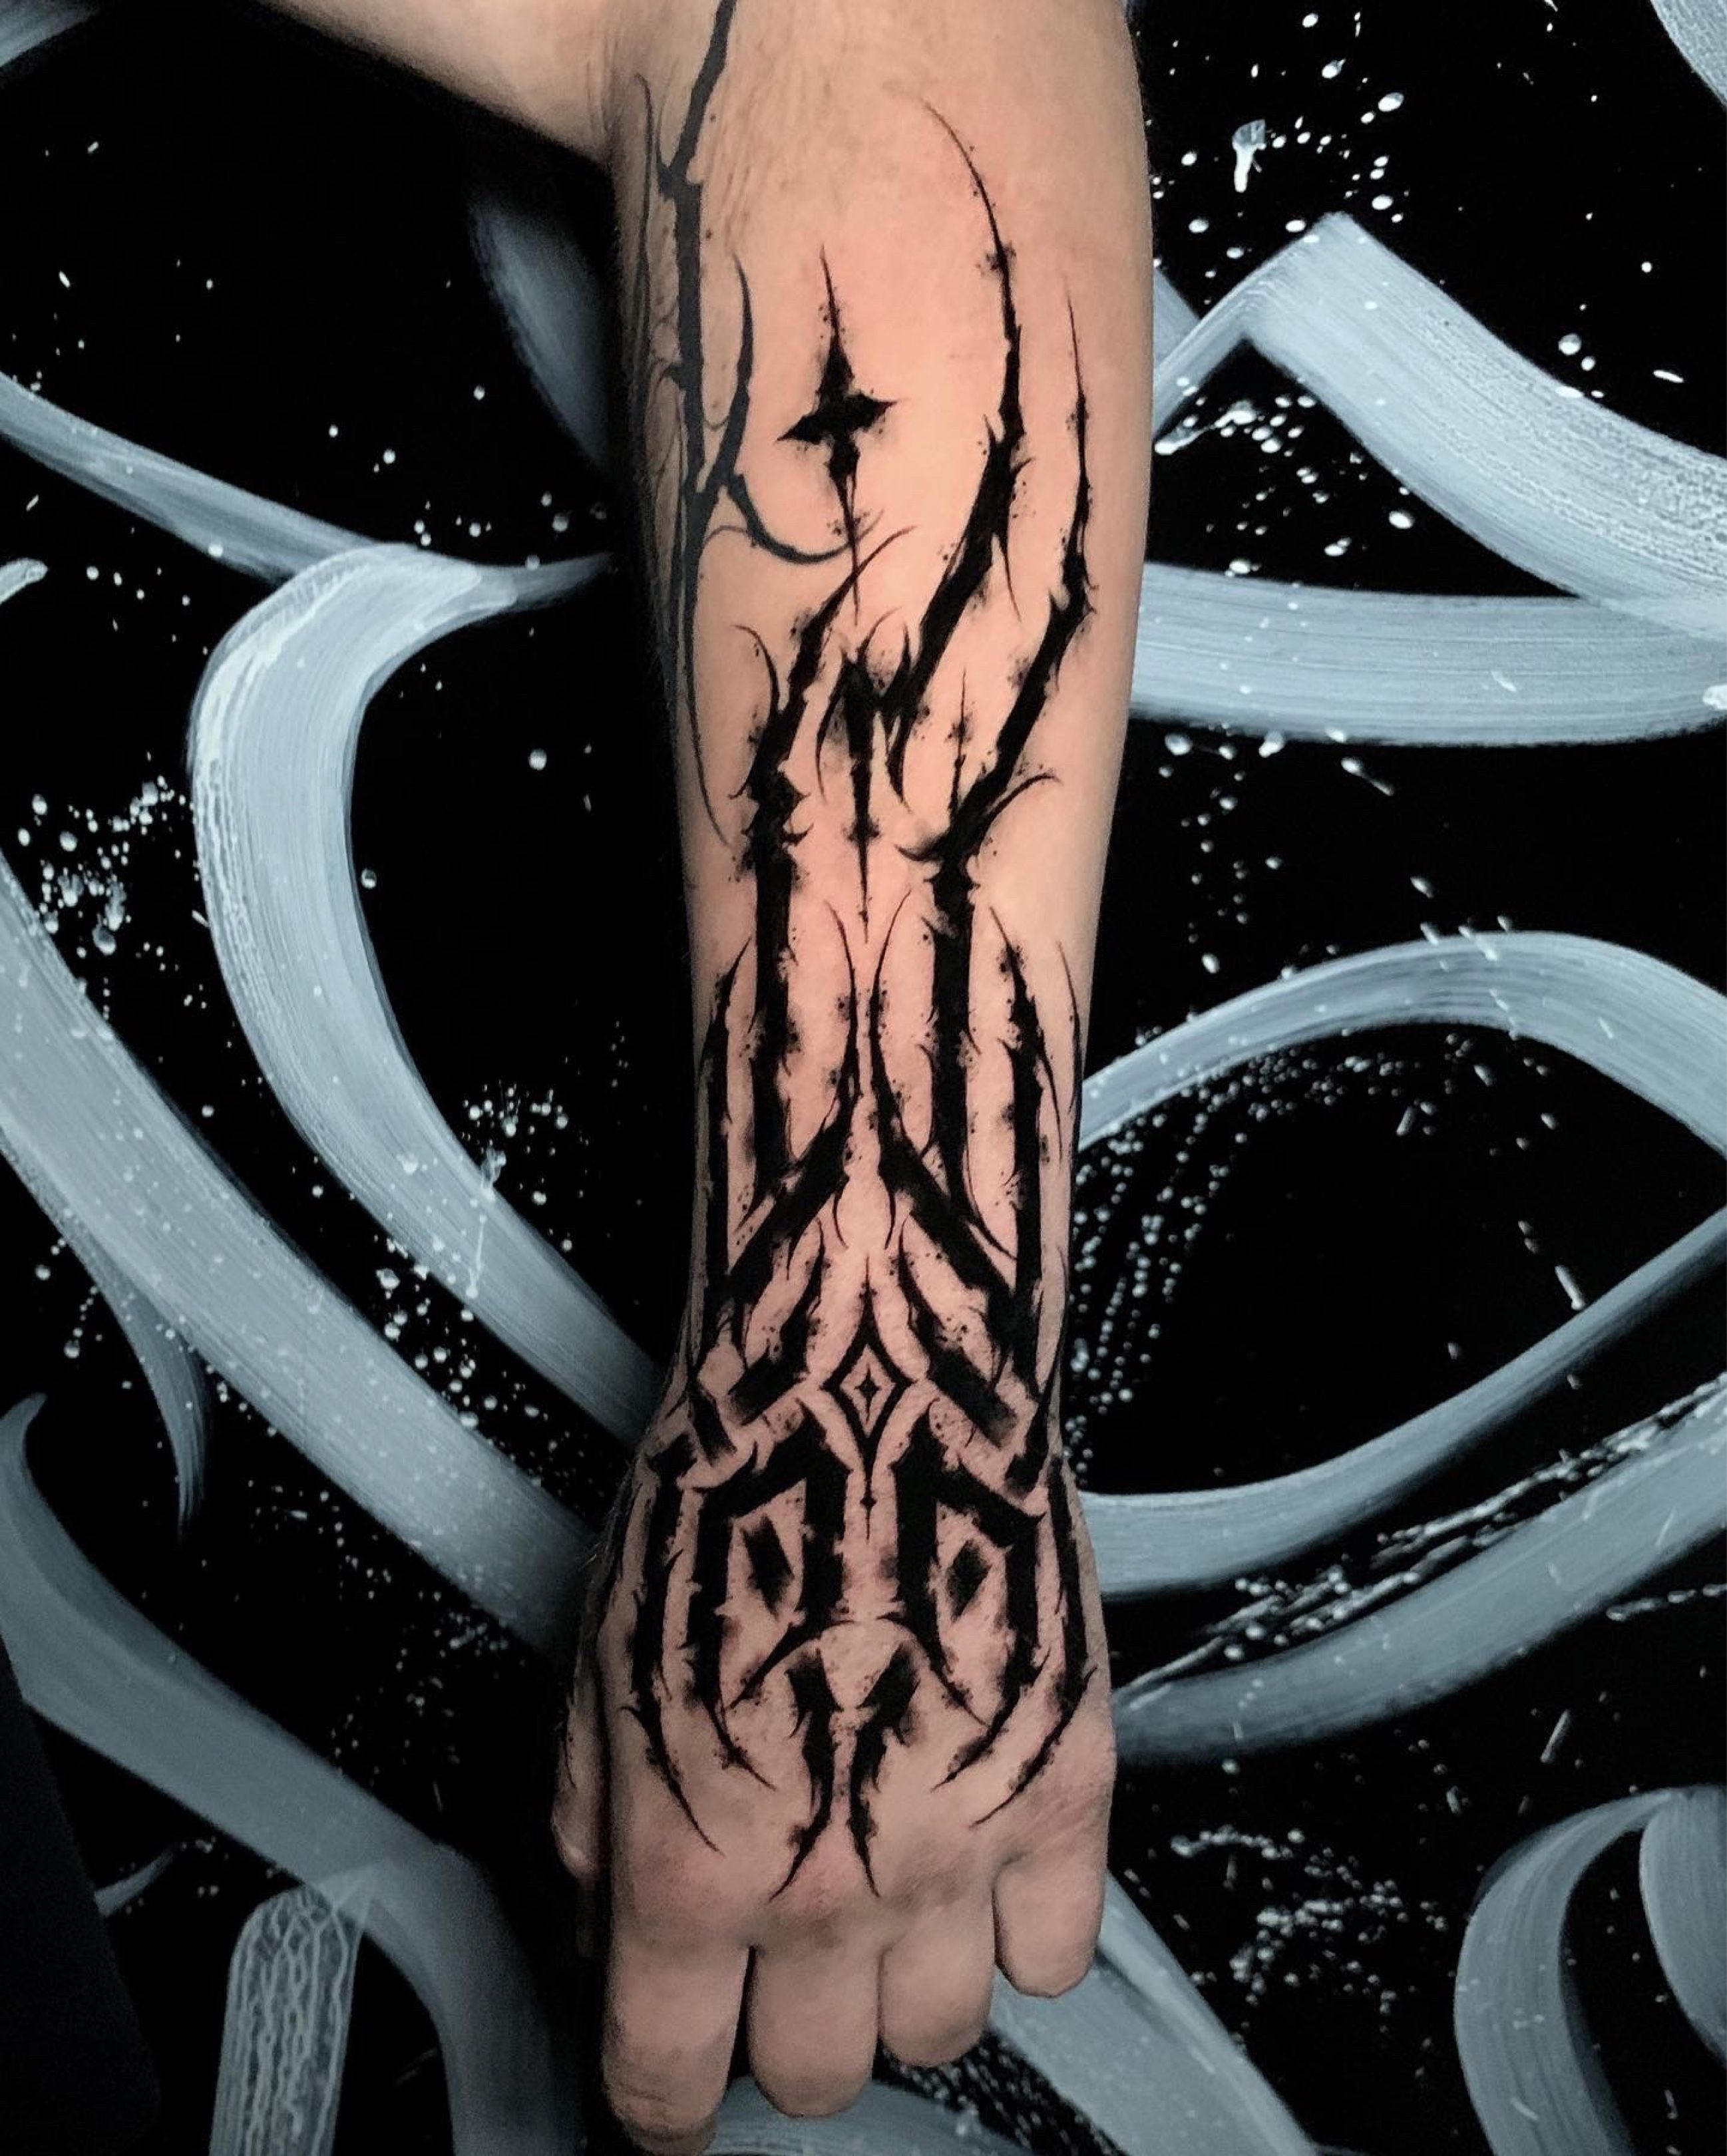 Mesmerizing Tattoo Sketch with Intricate Linework and Dark Artistry